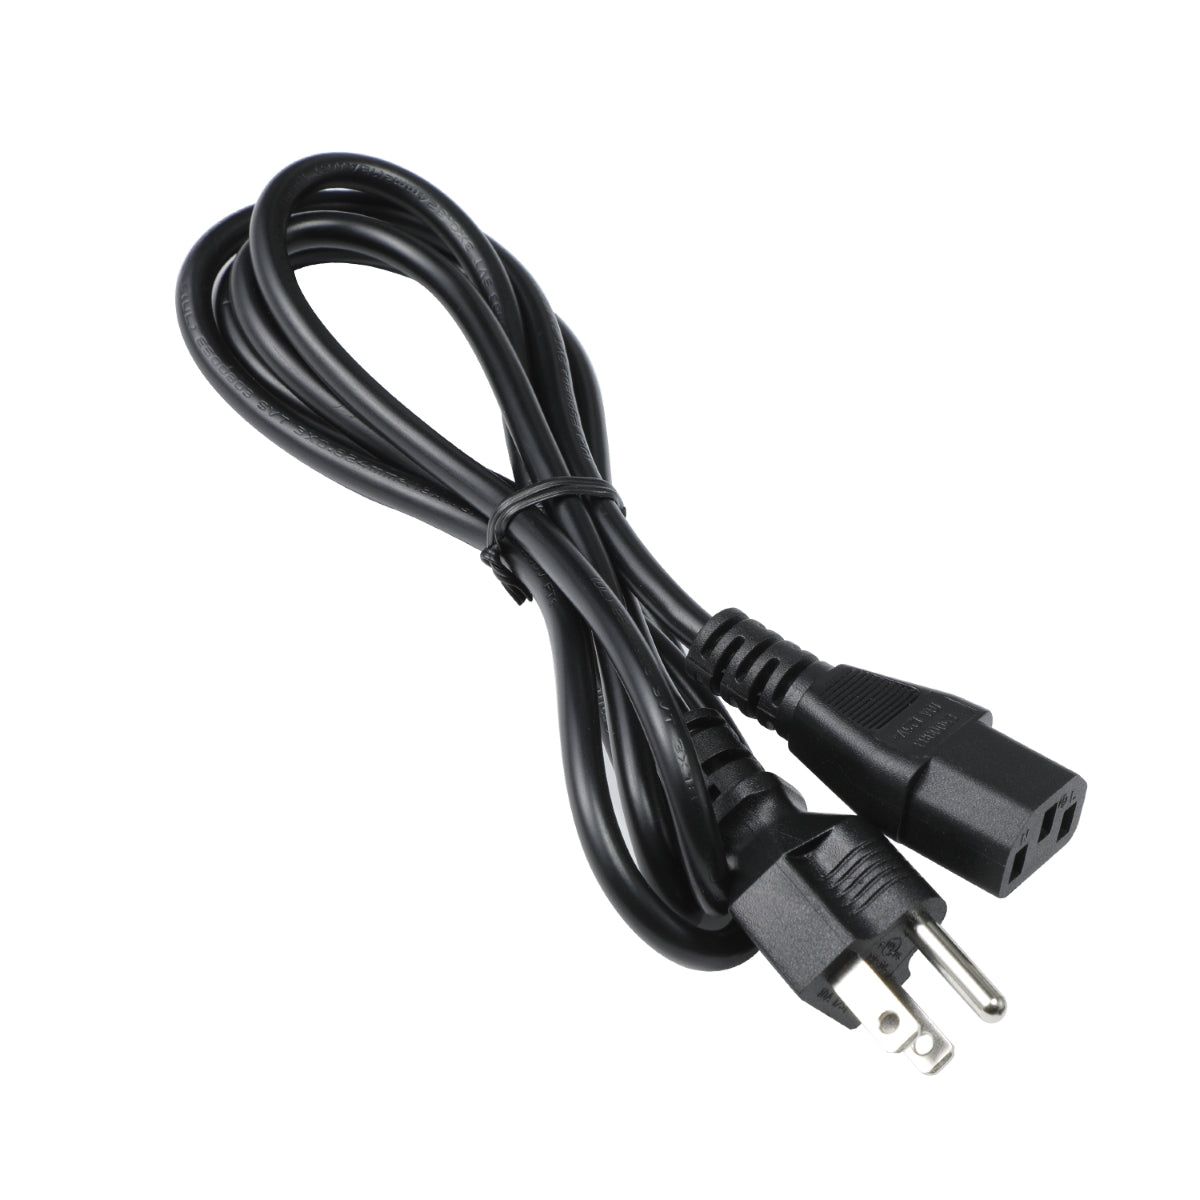 Power Cable for Philips 322E1C/27 LCD Monitor.